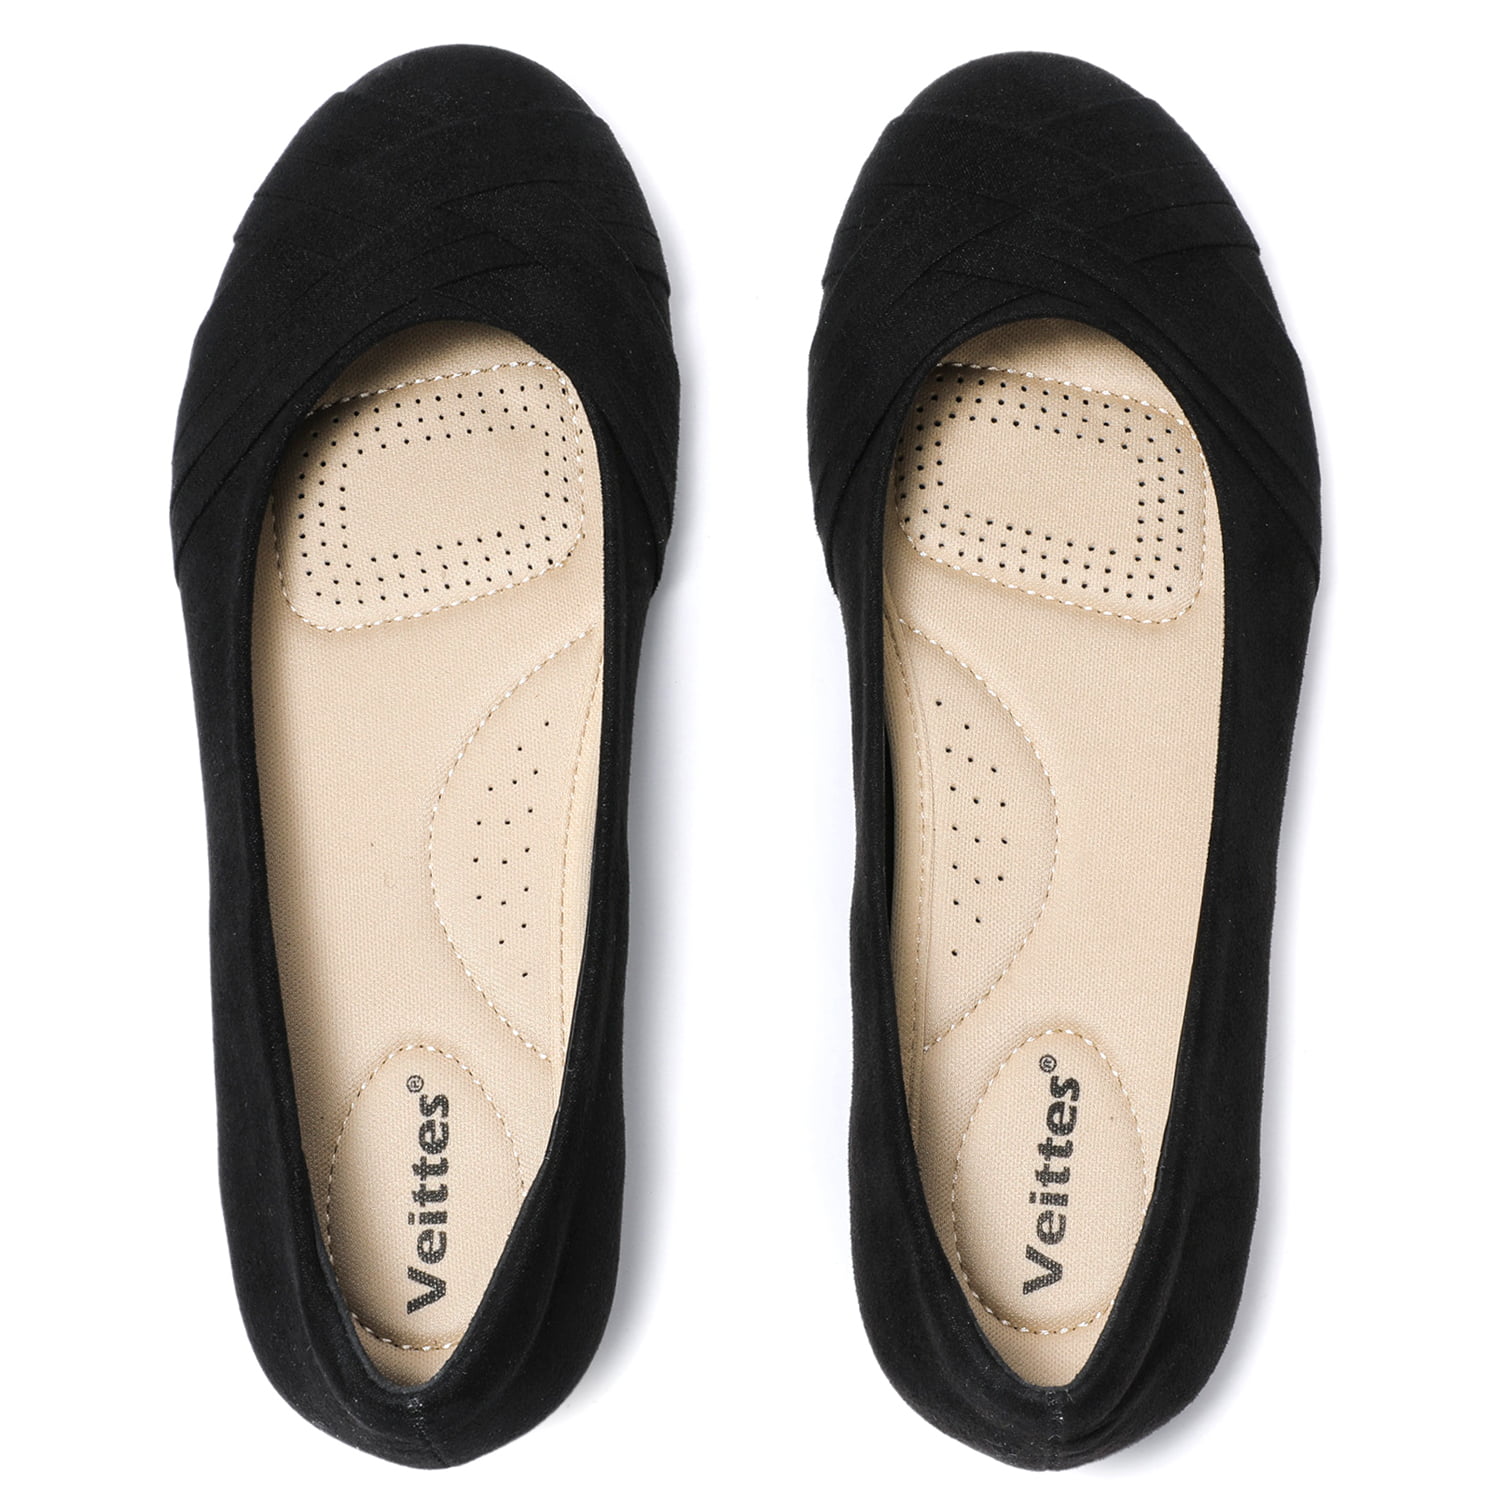 Comfortable Round Toe Classic Cute Slip-on Ballet Flats. Ataiwee Women's Flat Shoes 